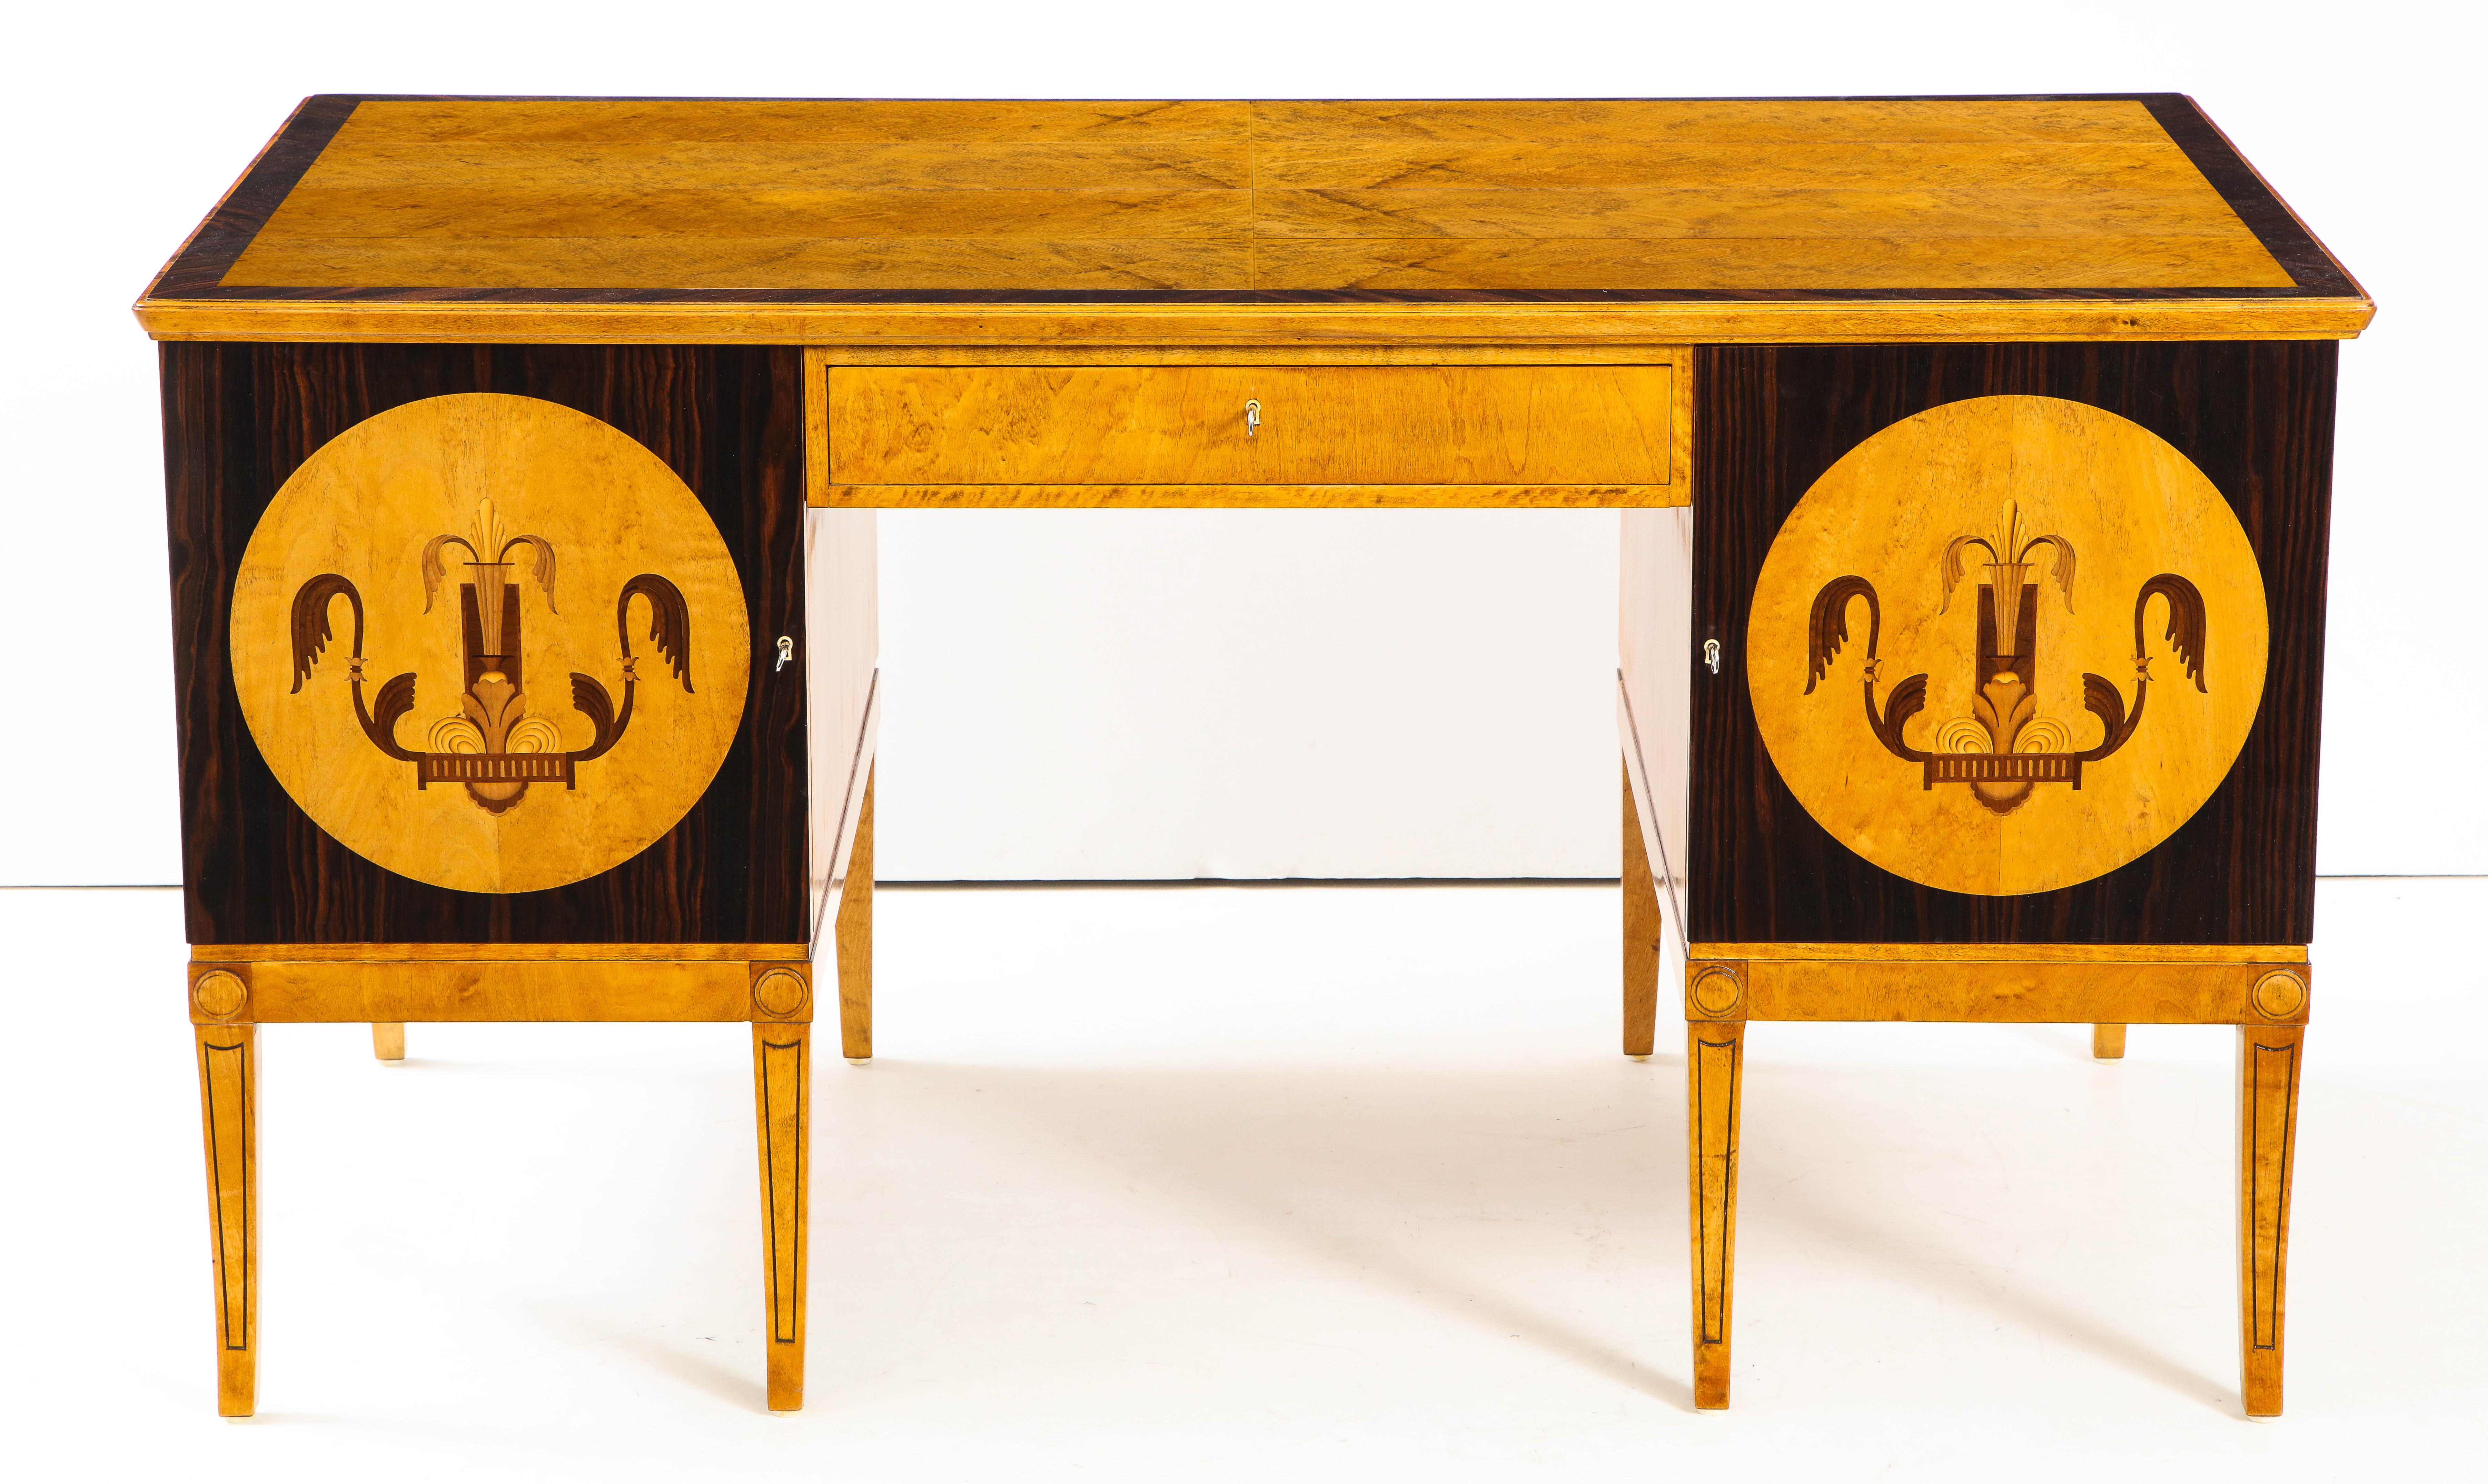 A Swedish Grace birch wood and rosewood pedestal desk, circa 1930-1940, the rectangular birch top with rosewood crossbanding, slightly rounded corners above a single frieze drawer. Both pedestals with inlaid cupboard doors opening to interior